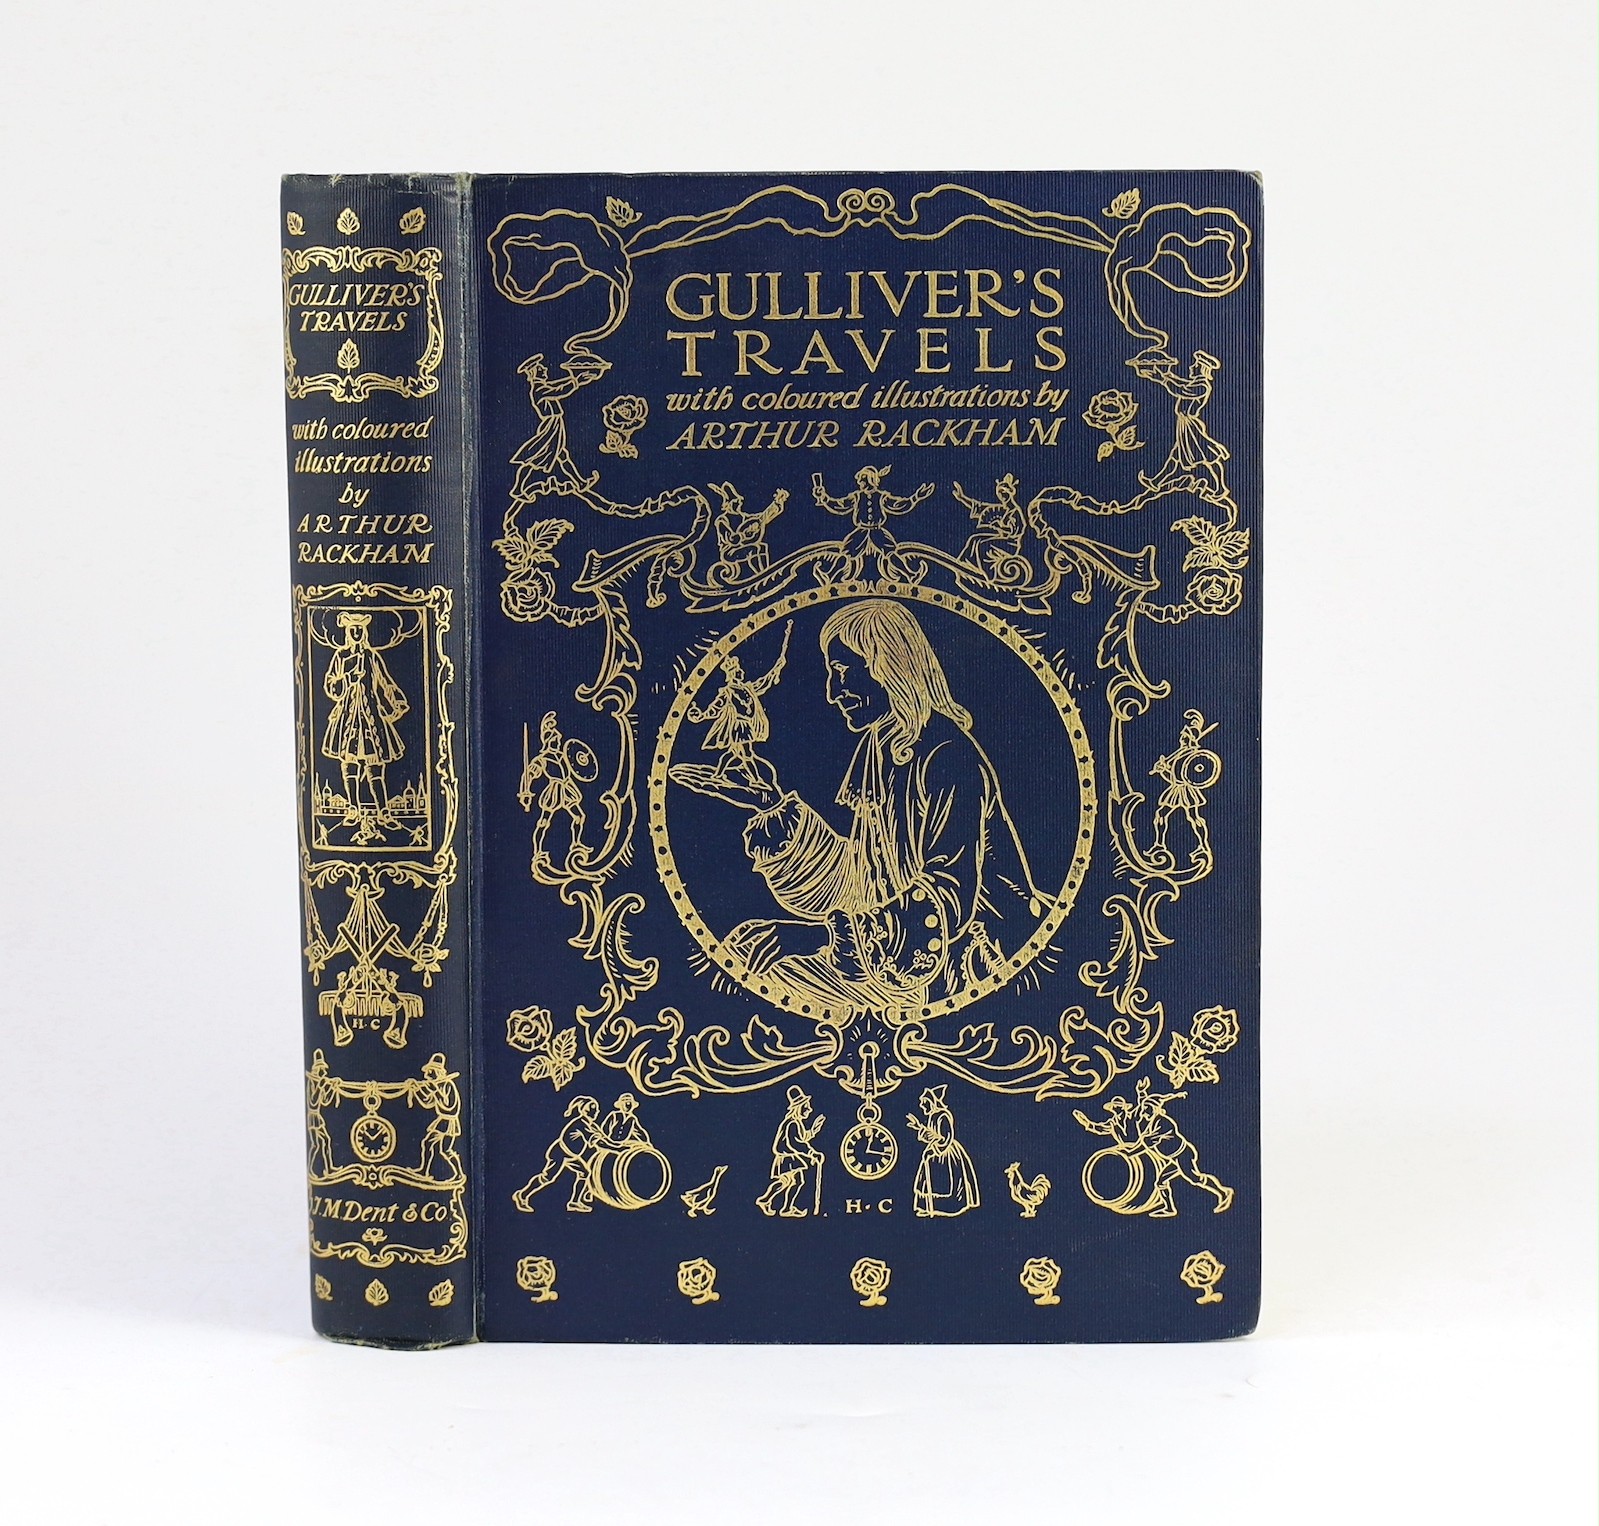 Swift, Jonathan - Gulliver’s Travels, illustrated with 12 coloured plates by Arthur Rackham, 8vo, blue pictorial cloth gilt, J.M. Dent & Co., London, 1909                                                                  